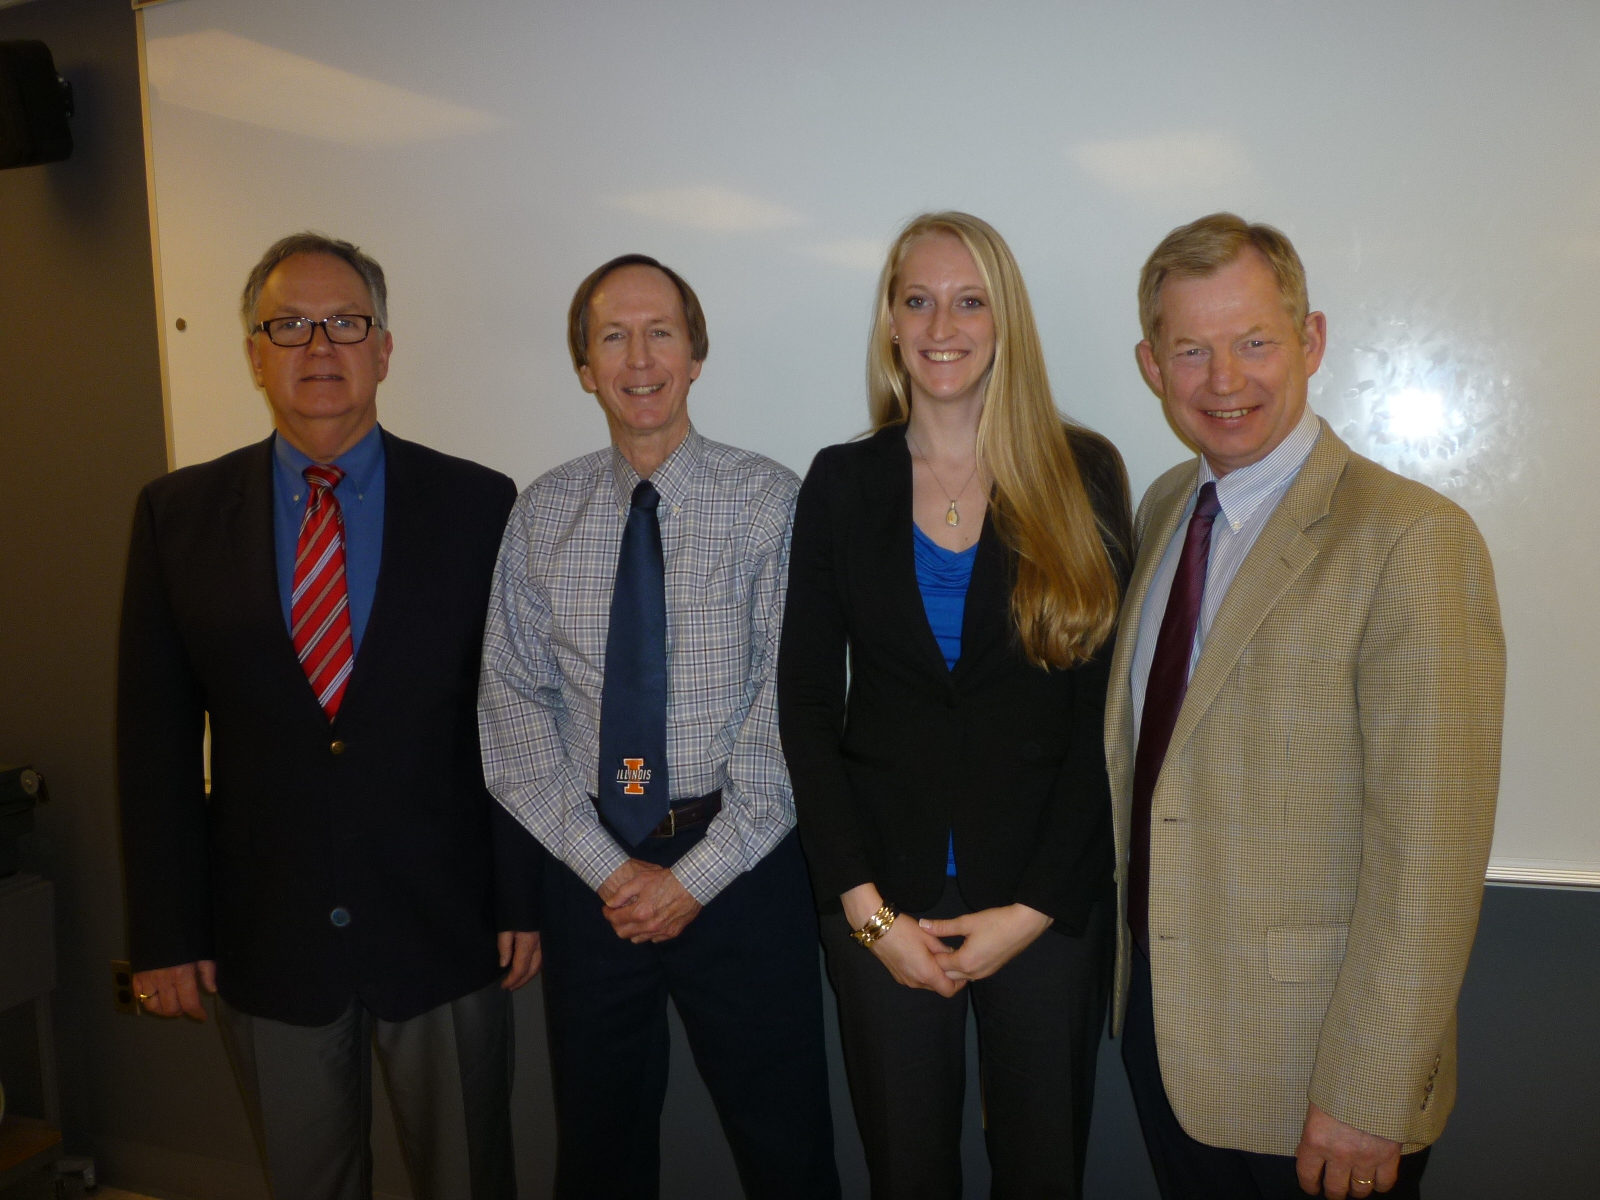 Chelsie with her Master's thesis committee after her successful defense on April 10.